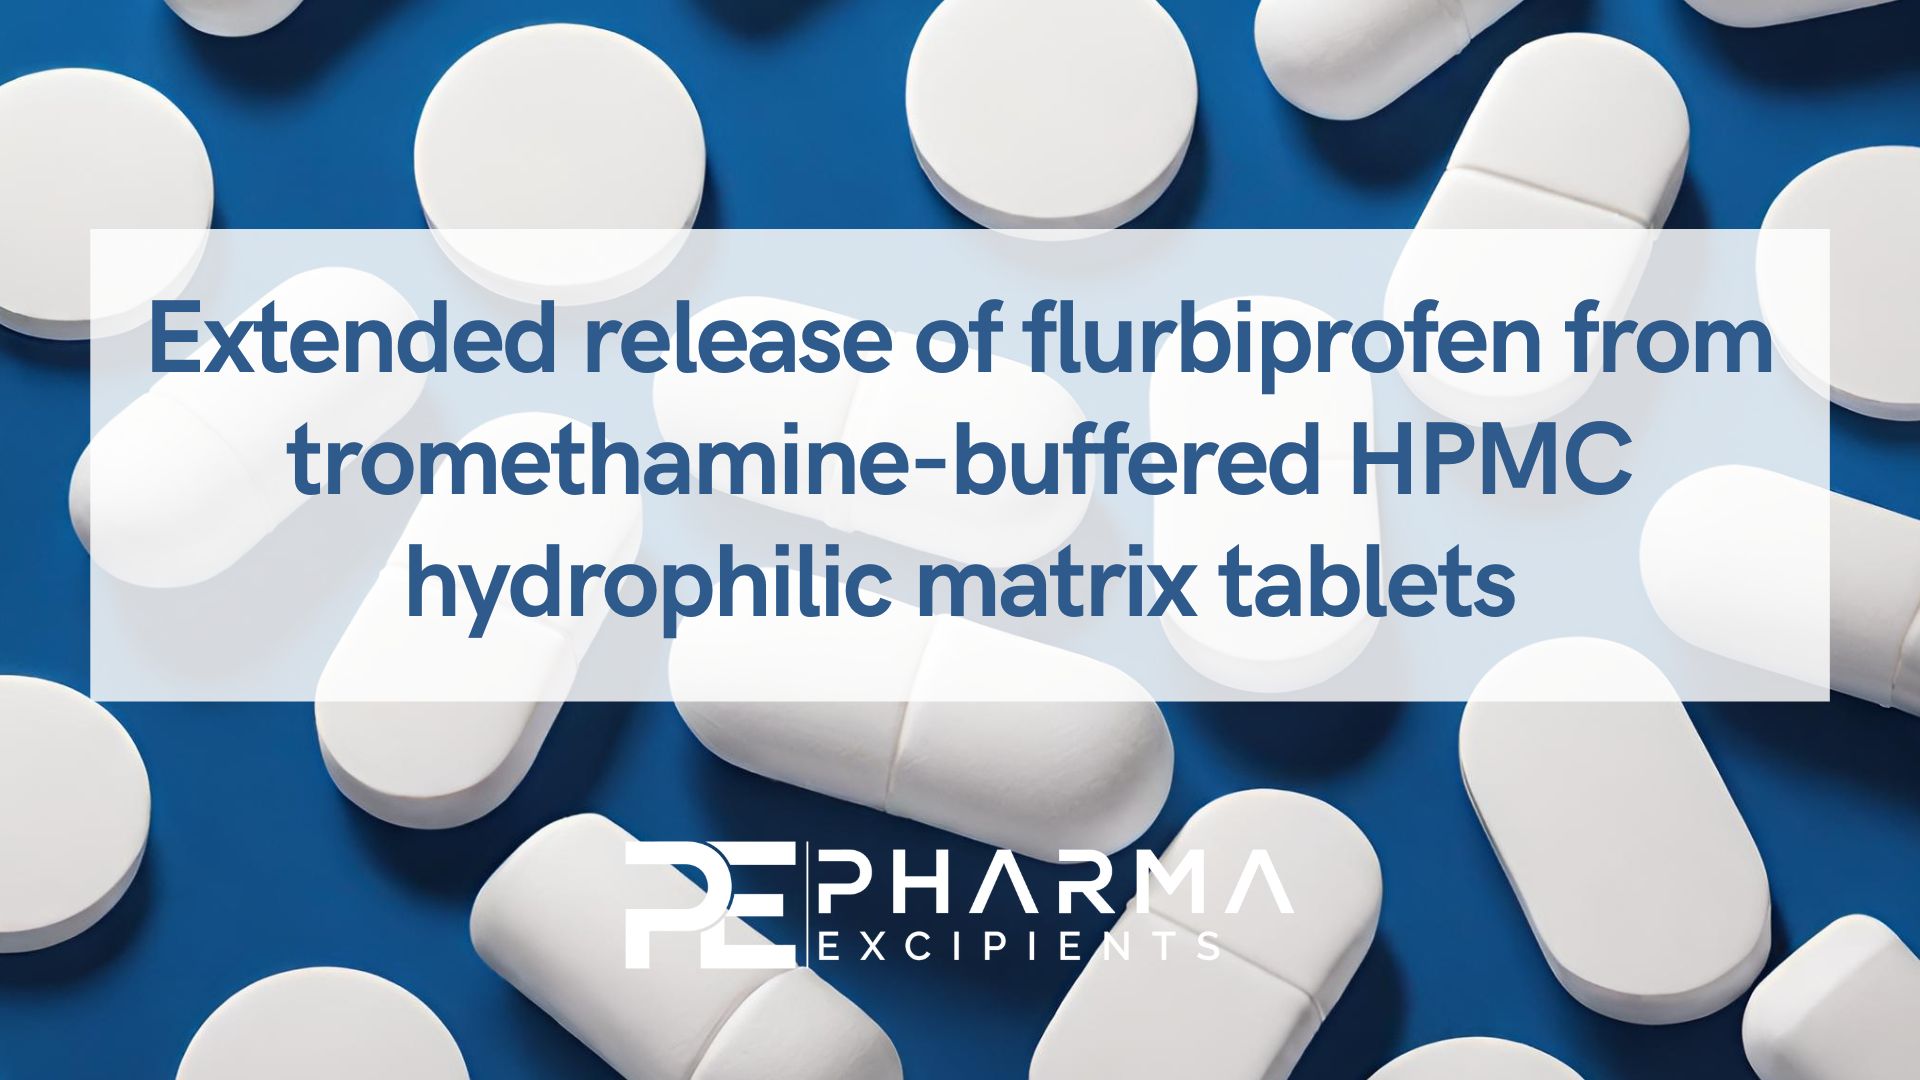 Extended release of flurbiprofen from tromethamine-buffered HPMC hydrophilic matrix tablets